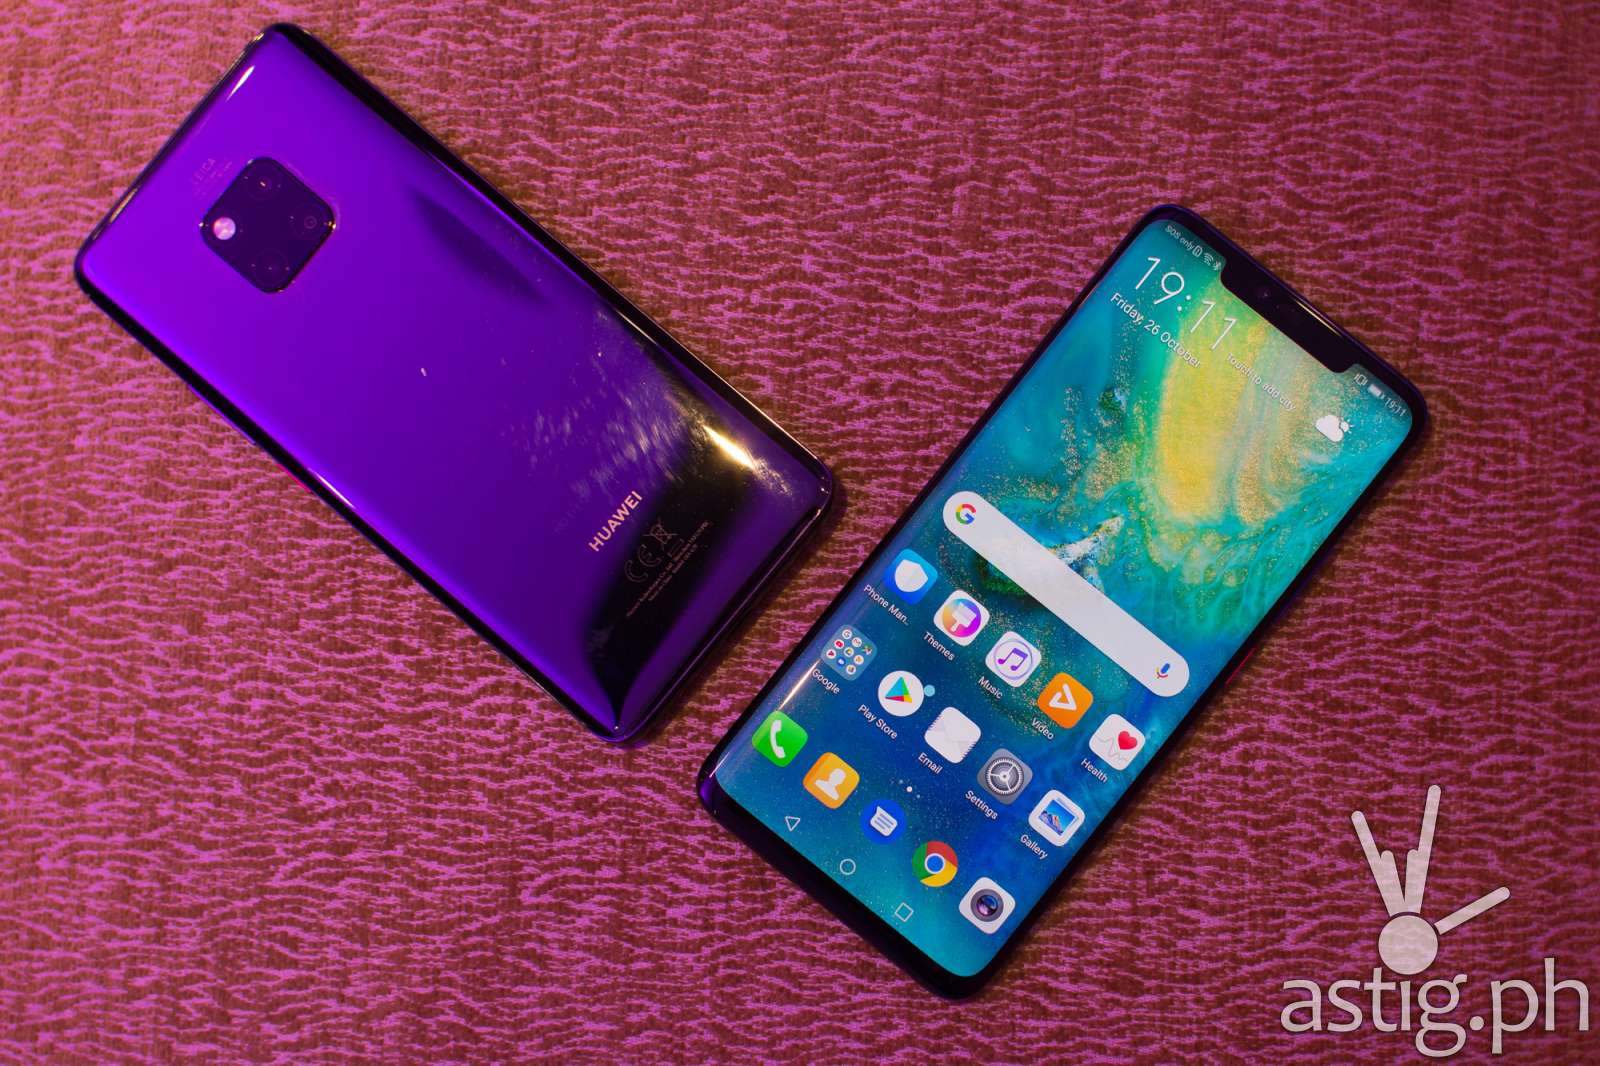 Huawei Mate 20 Pro - front and back